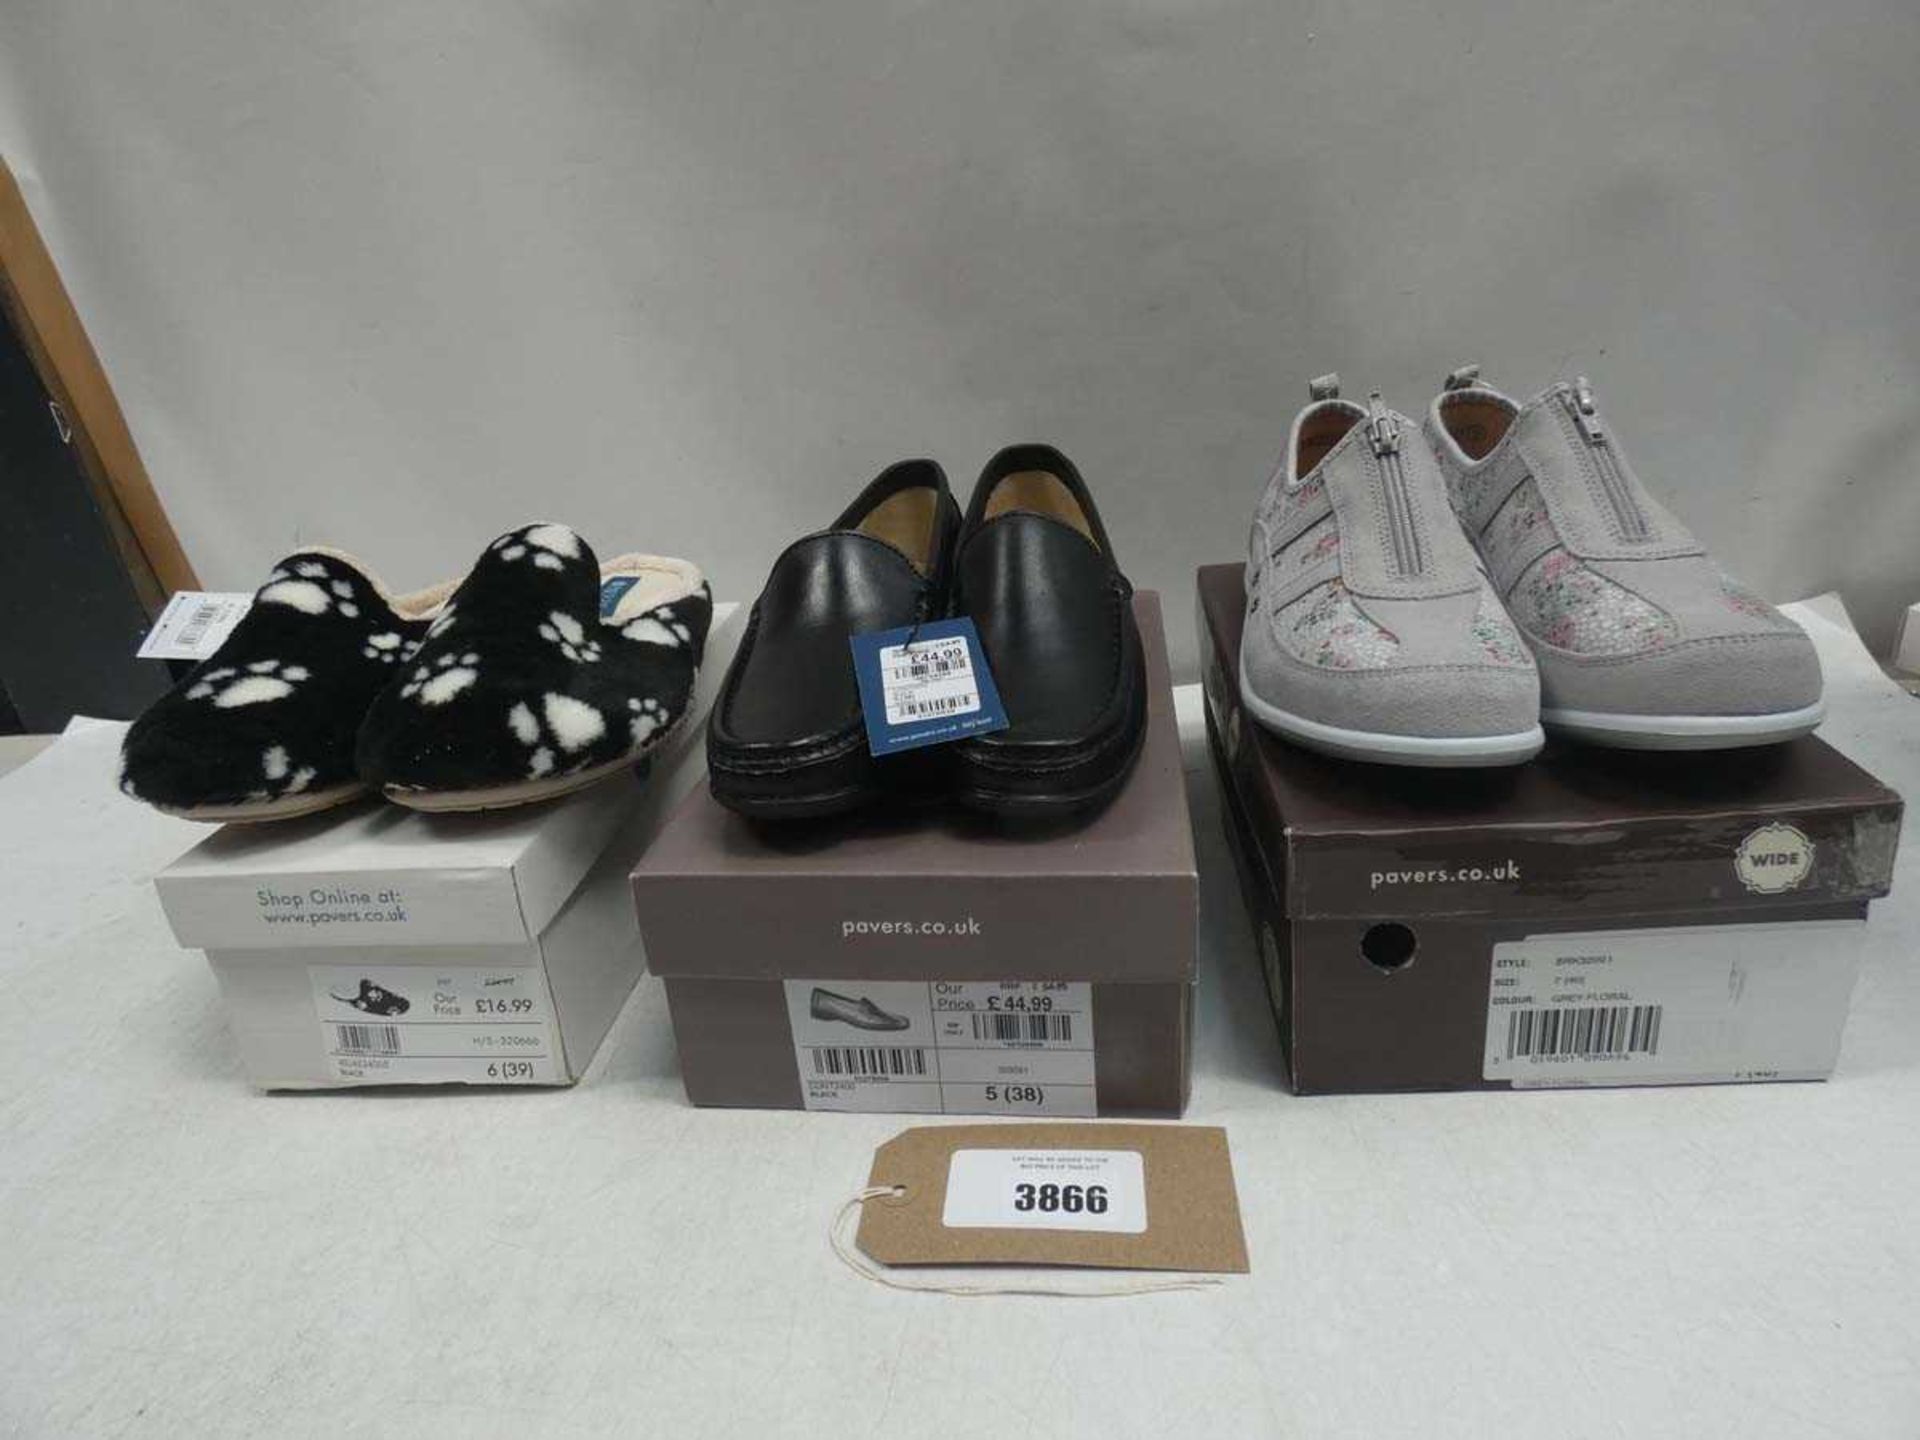 +VAT 3 pairs of Pavers shoes size 5, 6 and 7